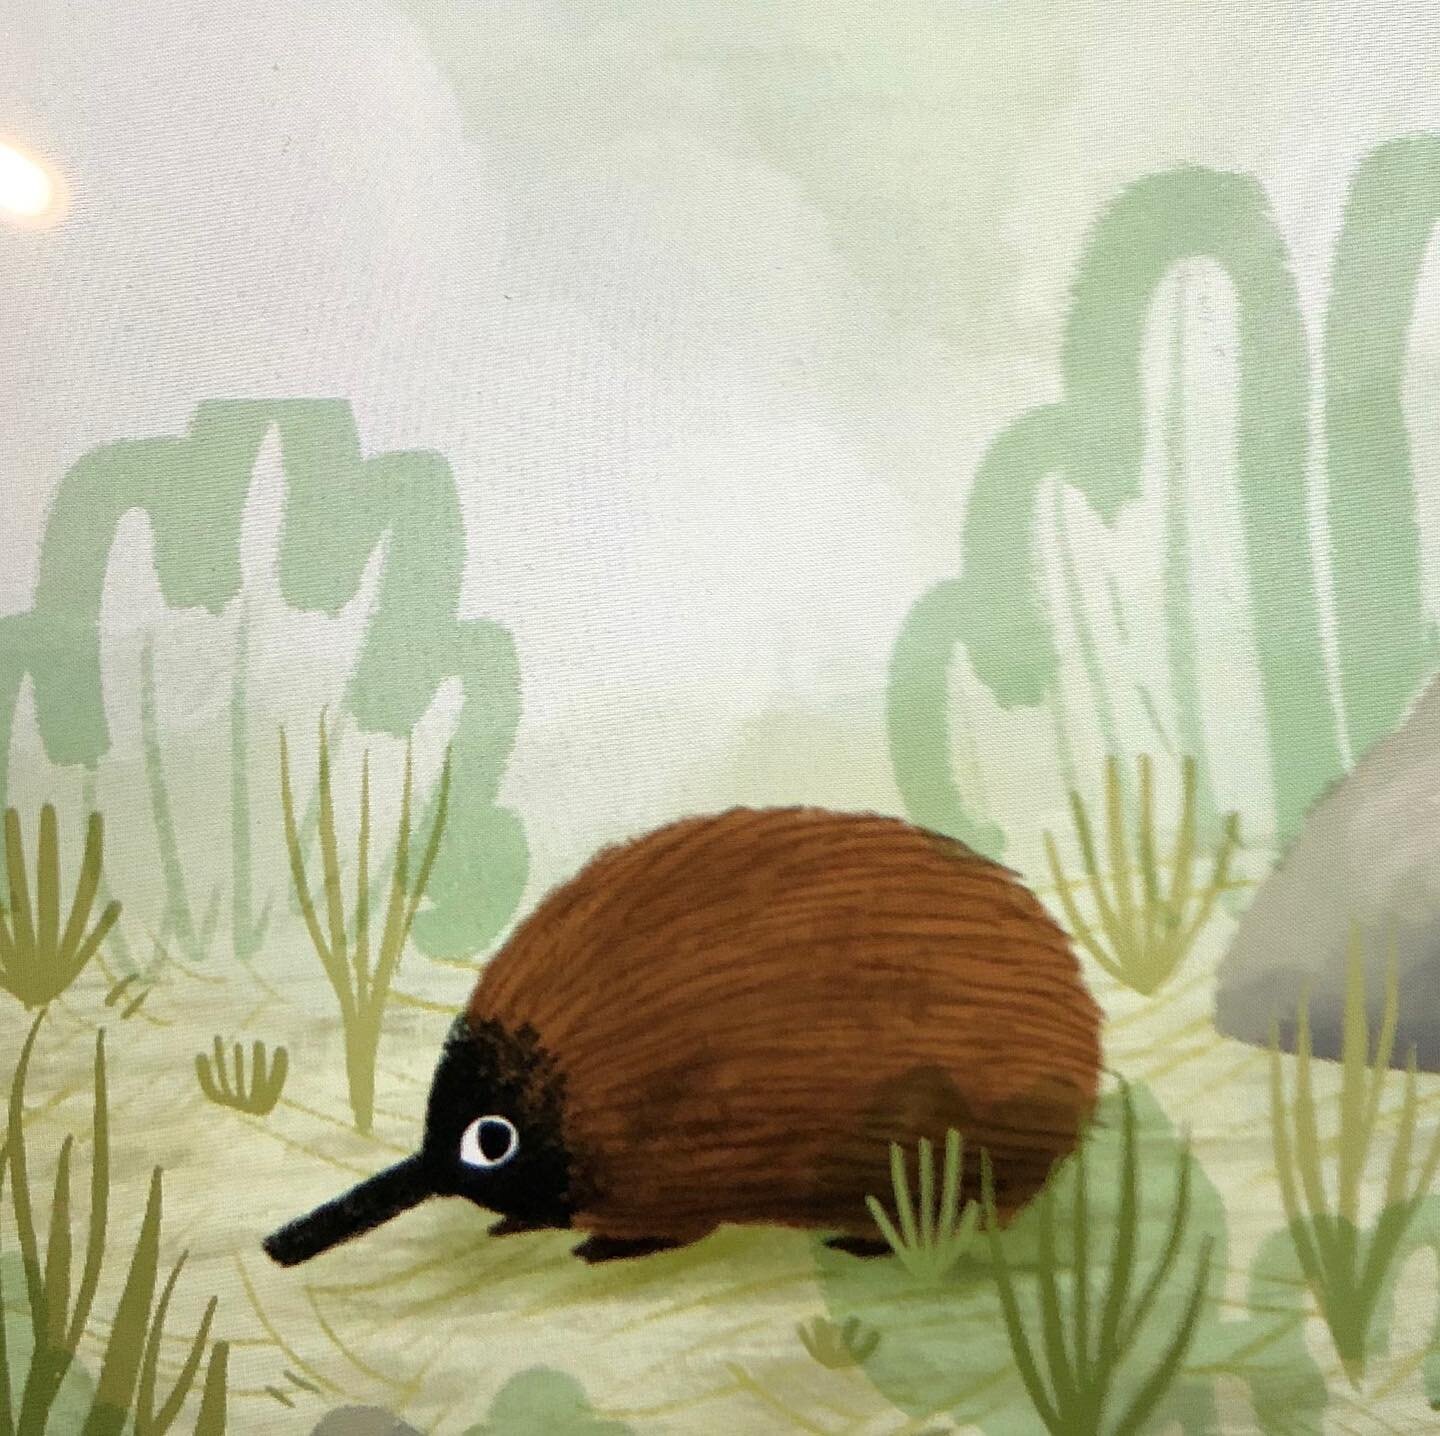 You gotta be echidna-ing me! This guy is FN adorable!!